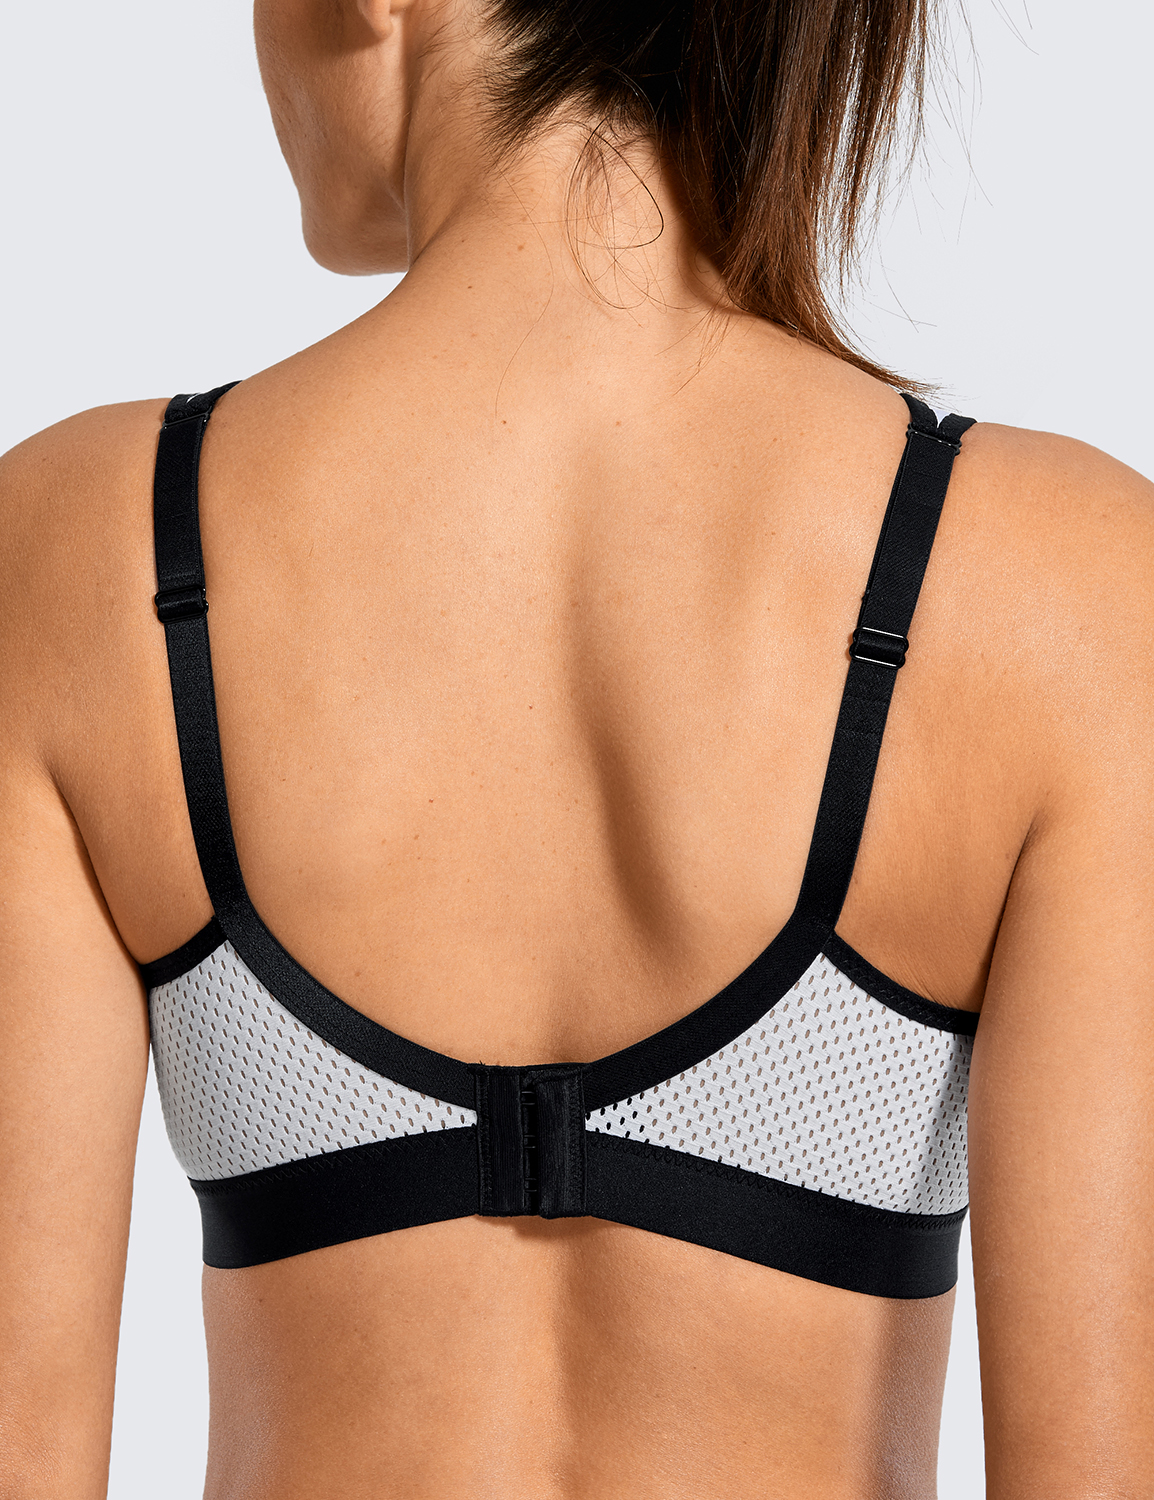 SYROKAN Sports Bra High Impact Support Bra Wirefree Bounce Control Plus Size